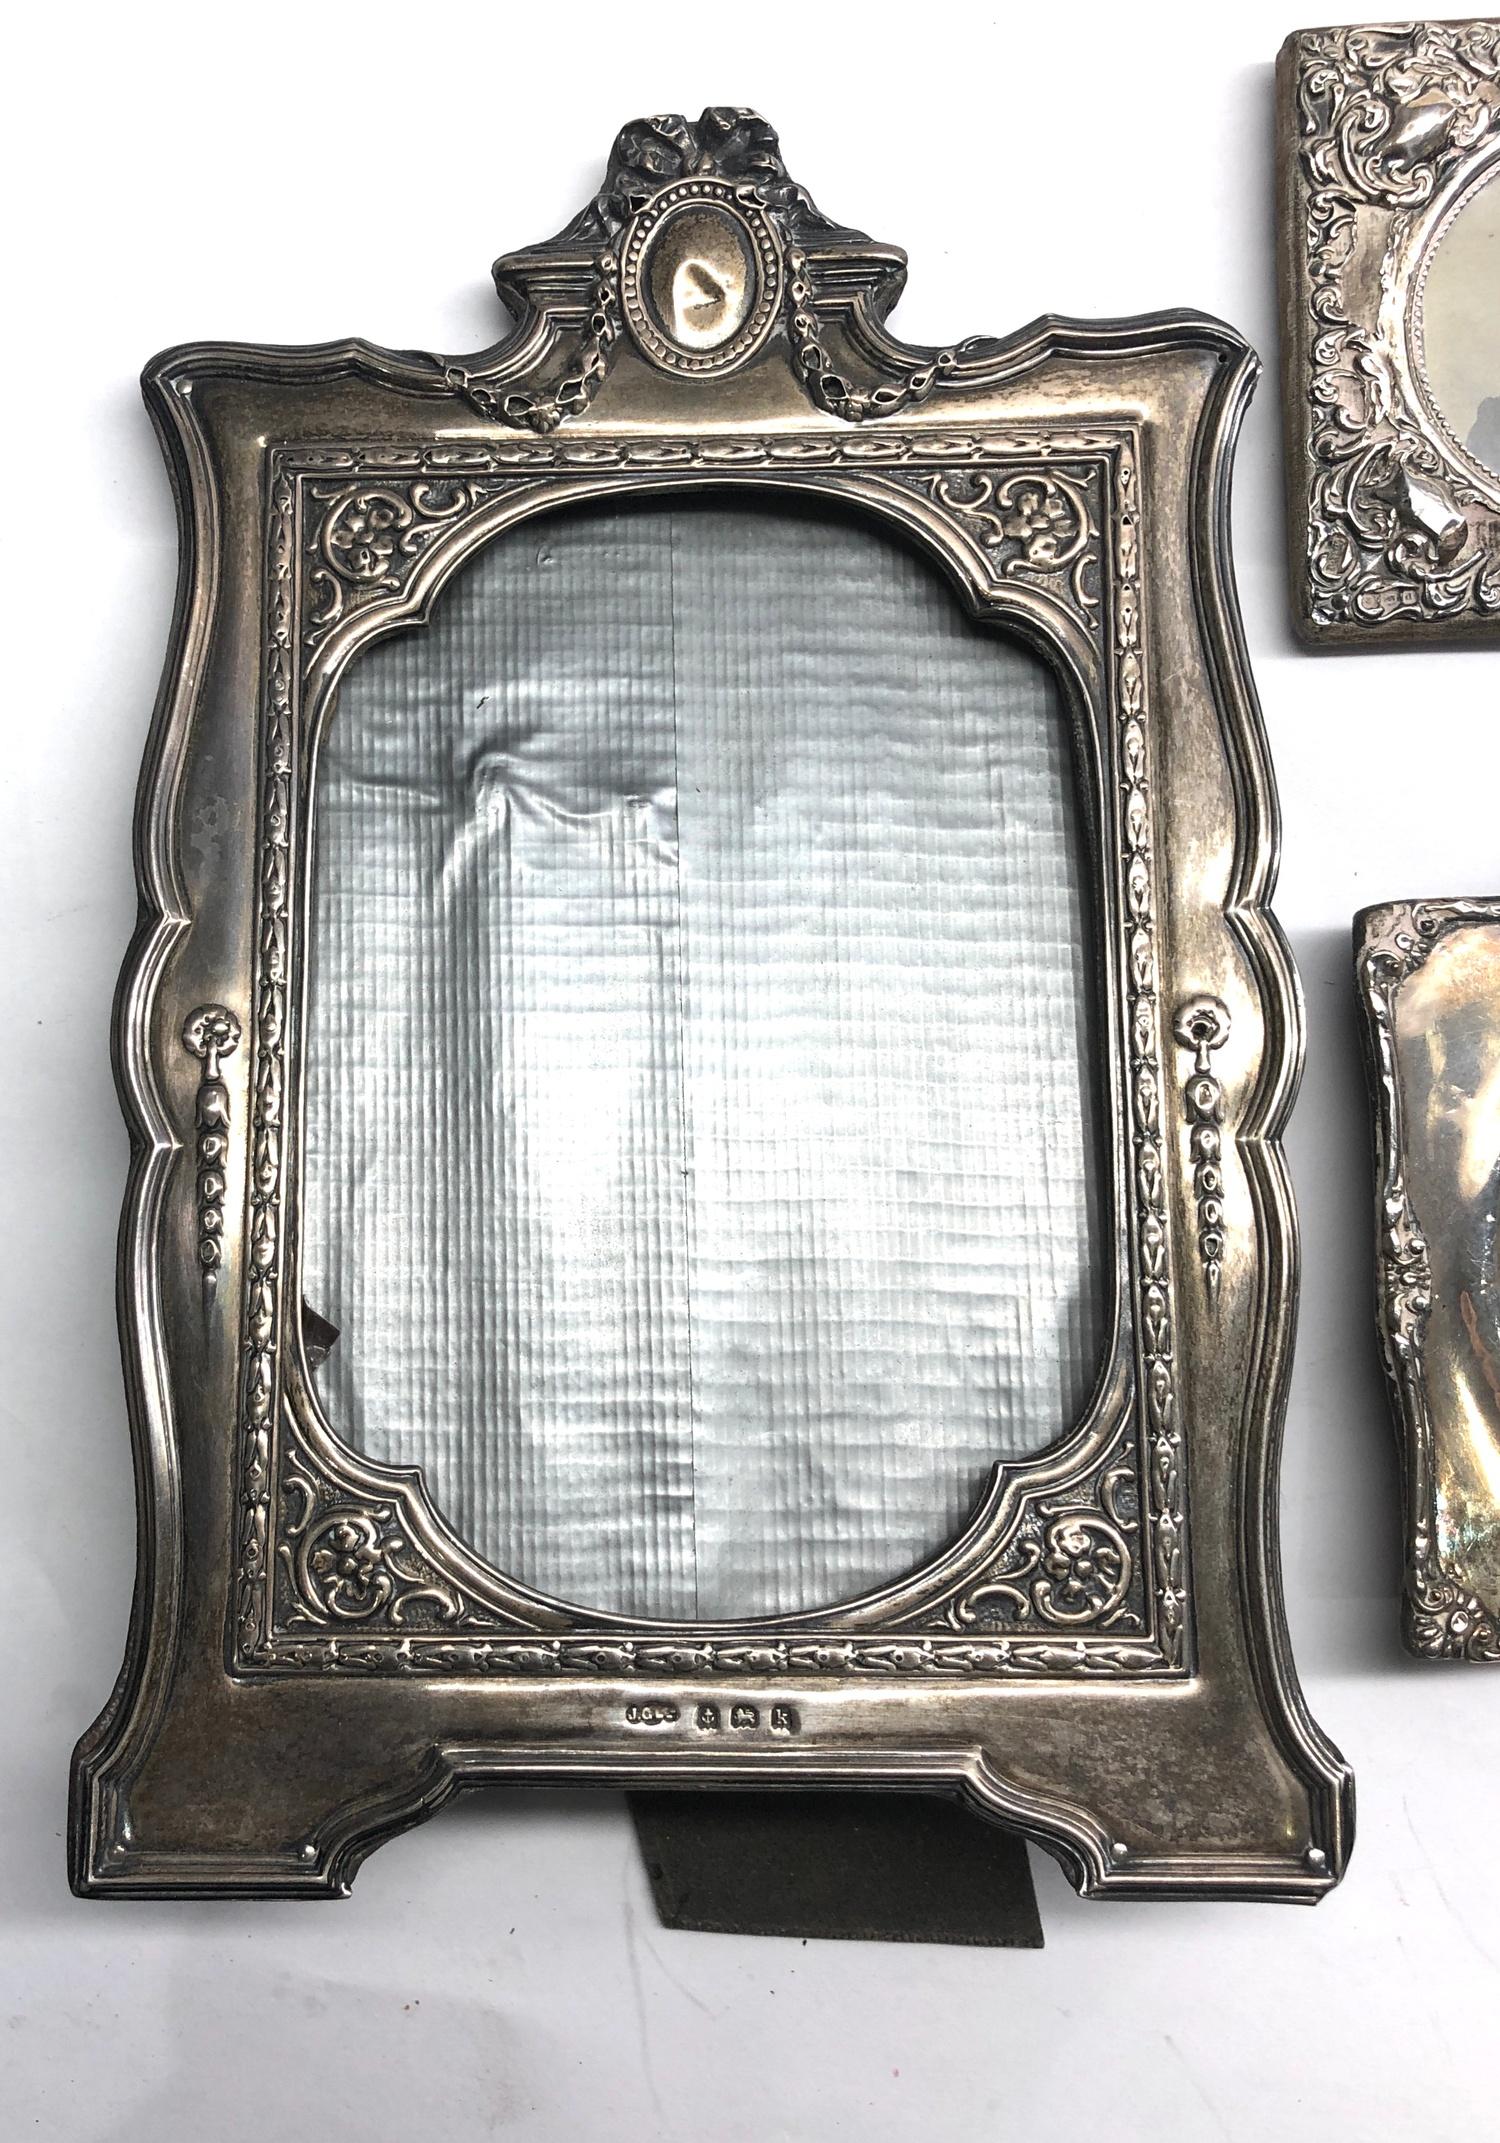 3 silver picture frames in need of restoration as shown in images - Image 2 of 3